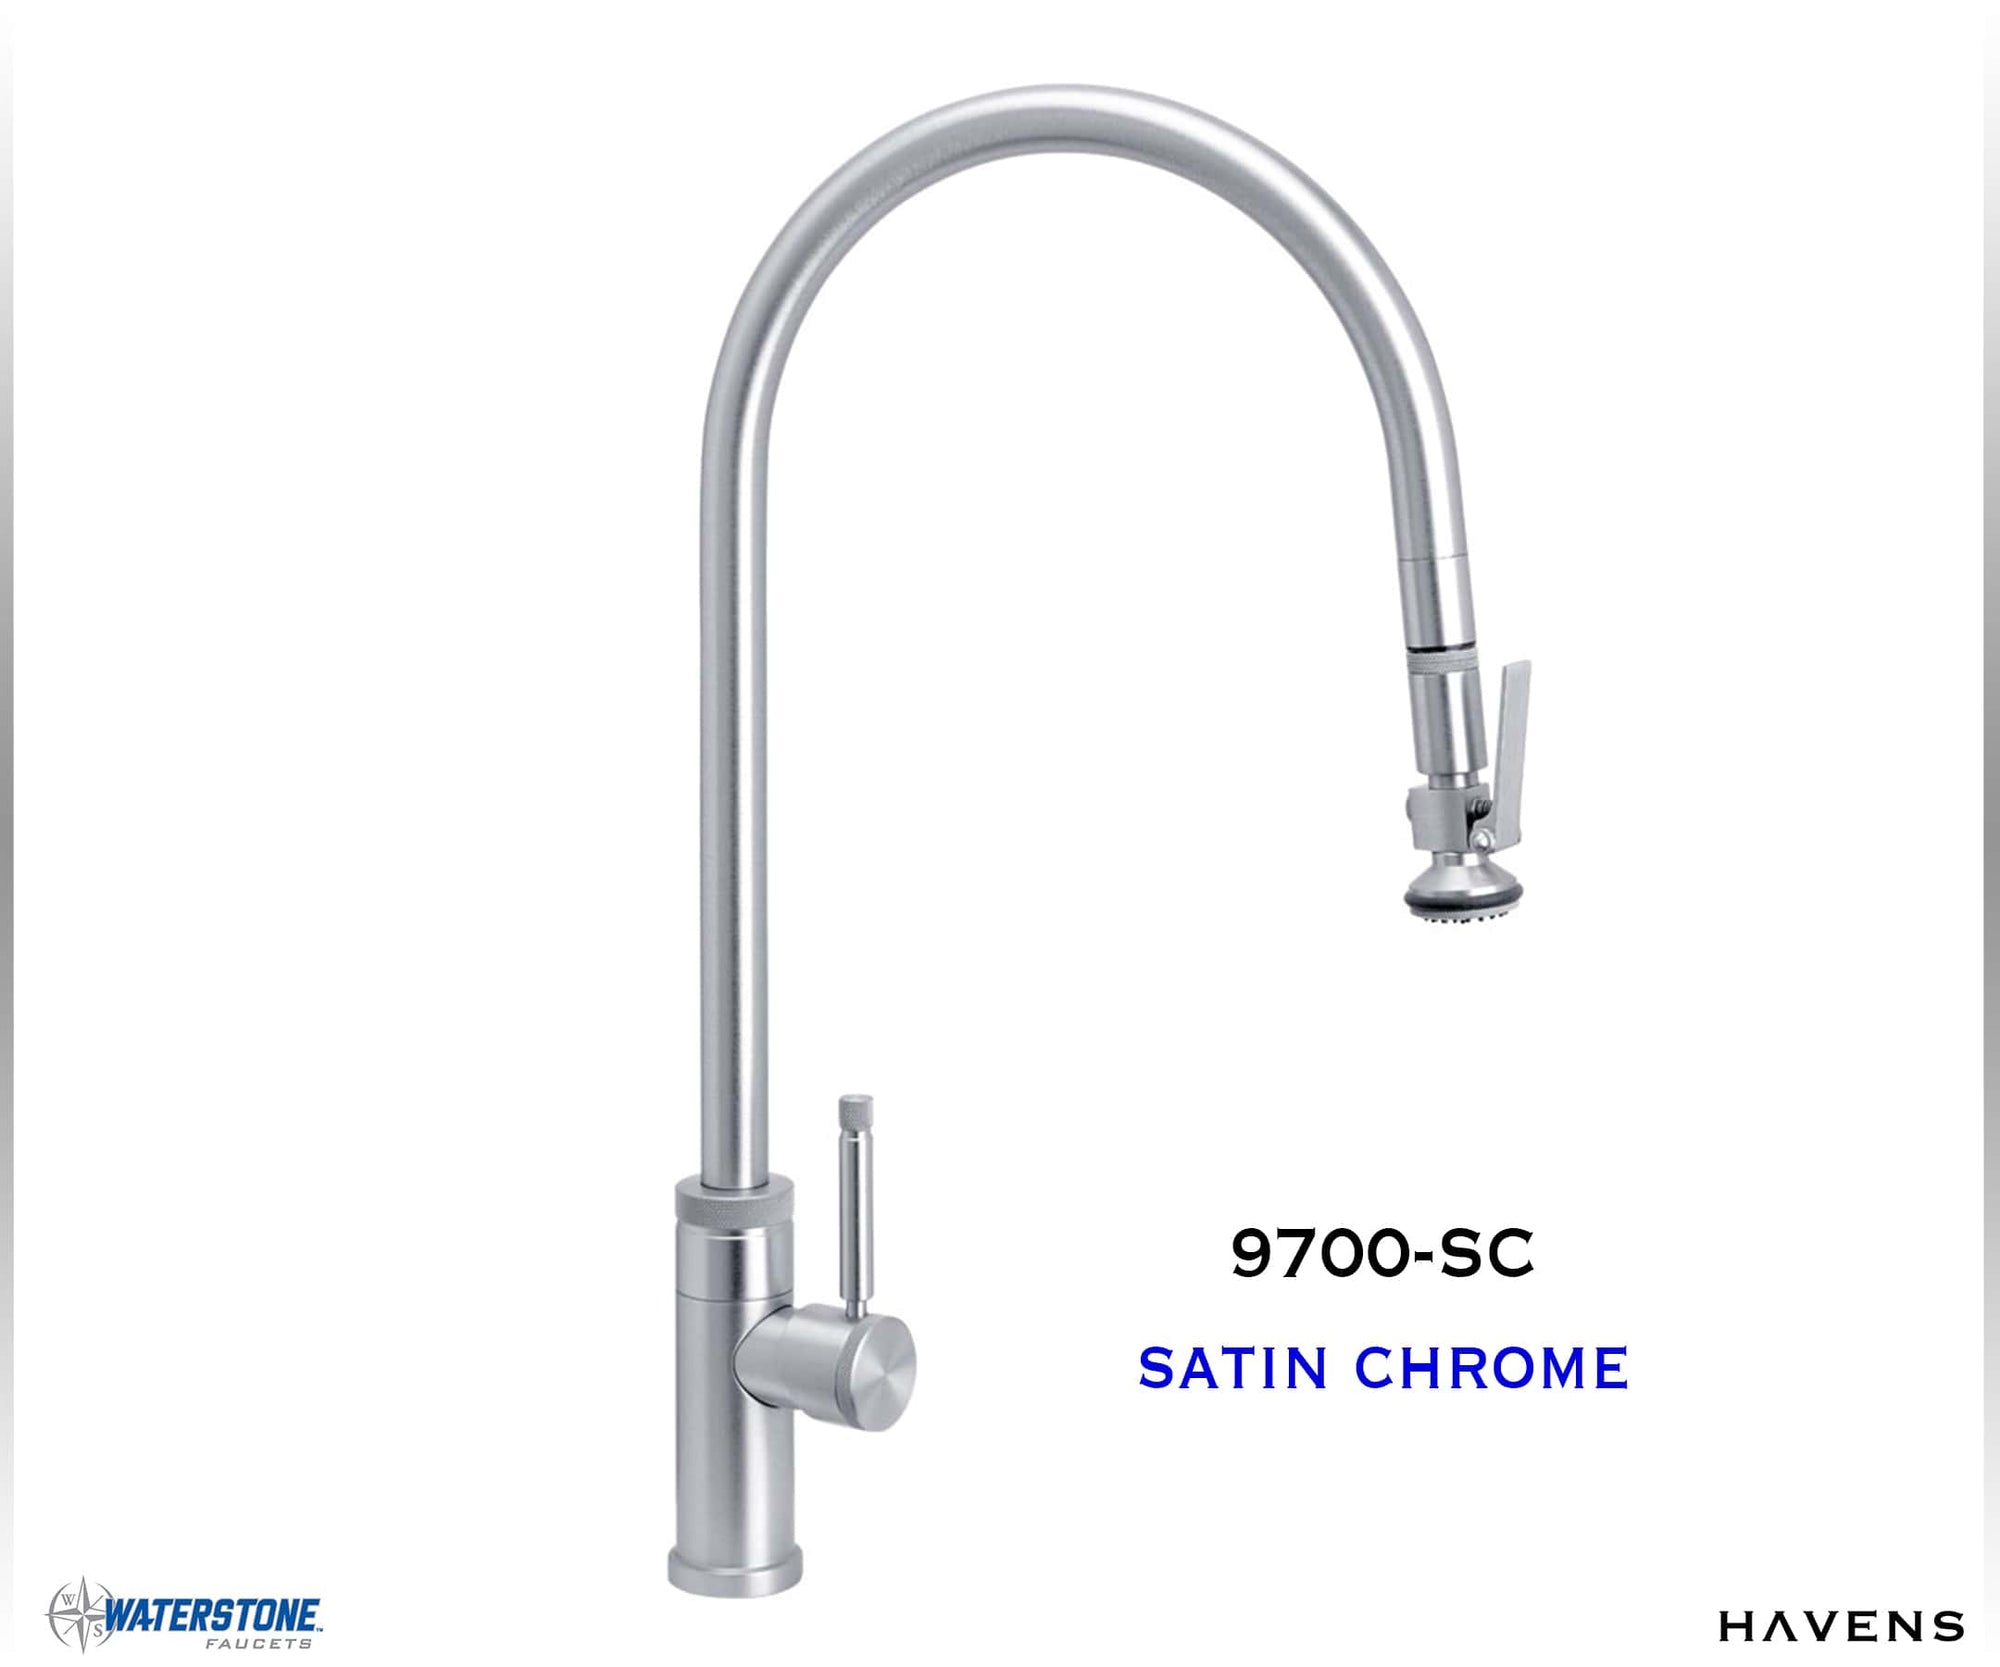 Waterstone Industrial Extended Reach PLP Pulldown Faucet - 9700